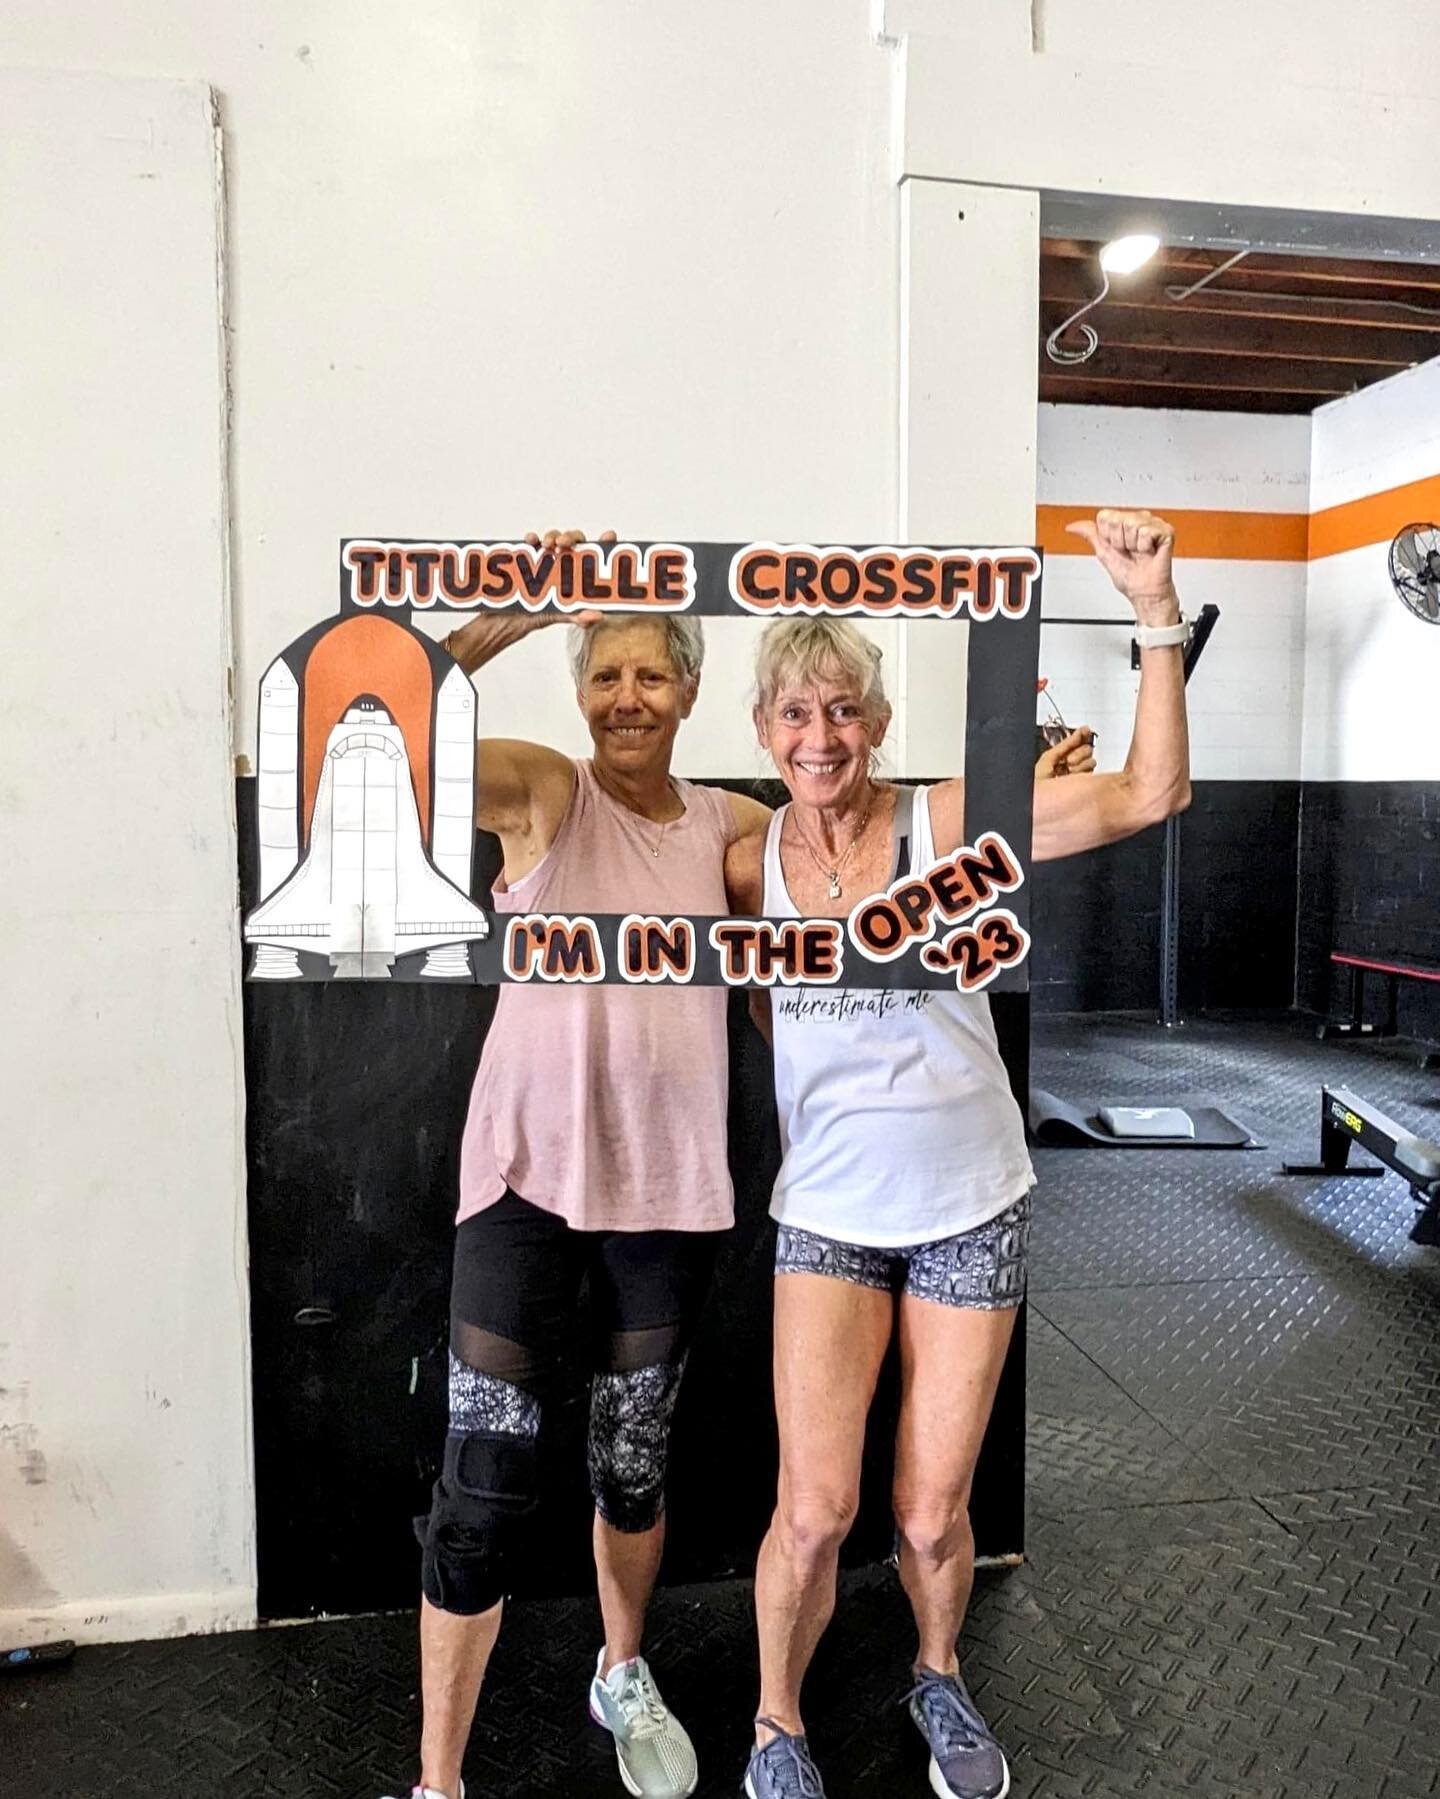 Our girls doing their first #crossfitopen today! Way to go Pam + Karen!! 
.